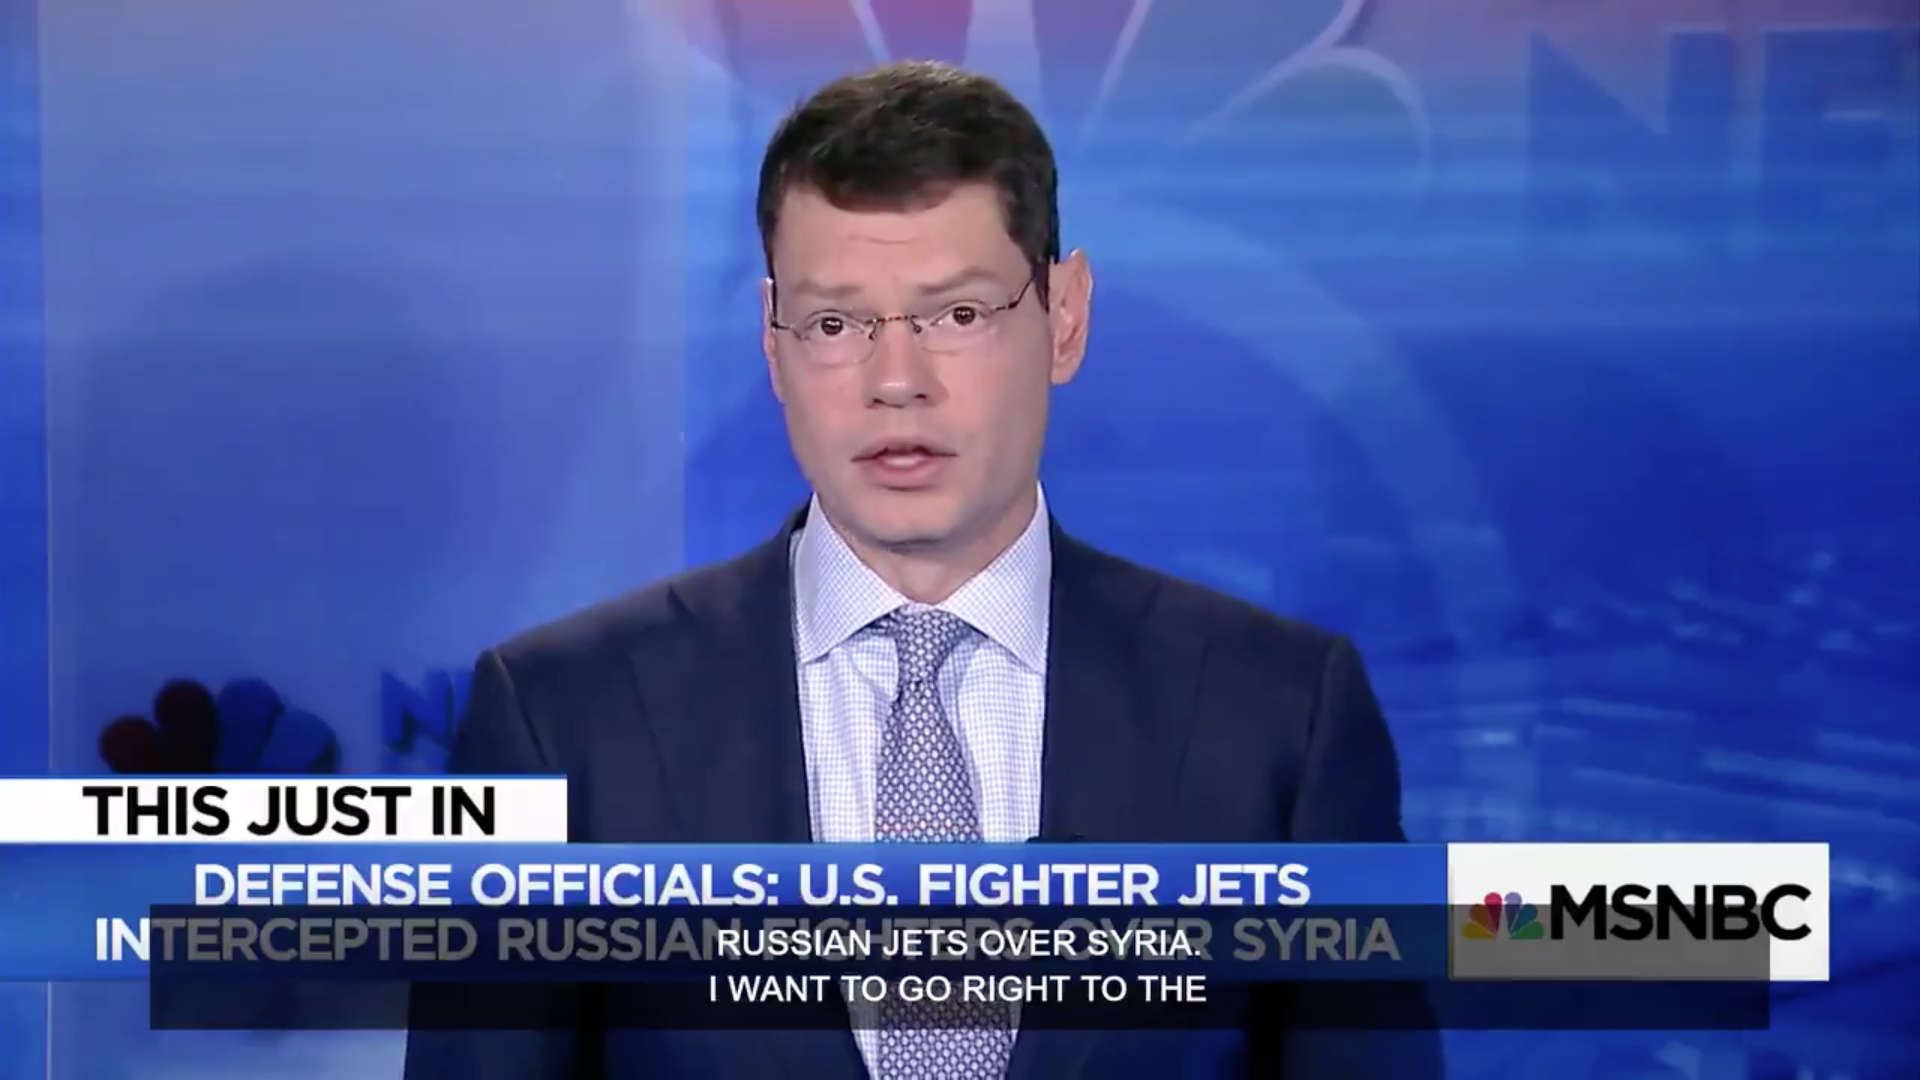 U.S. fighter jets intercepted Russian fighters over Syria.